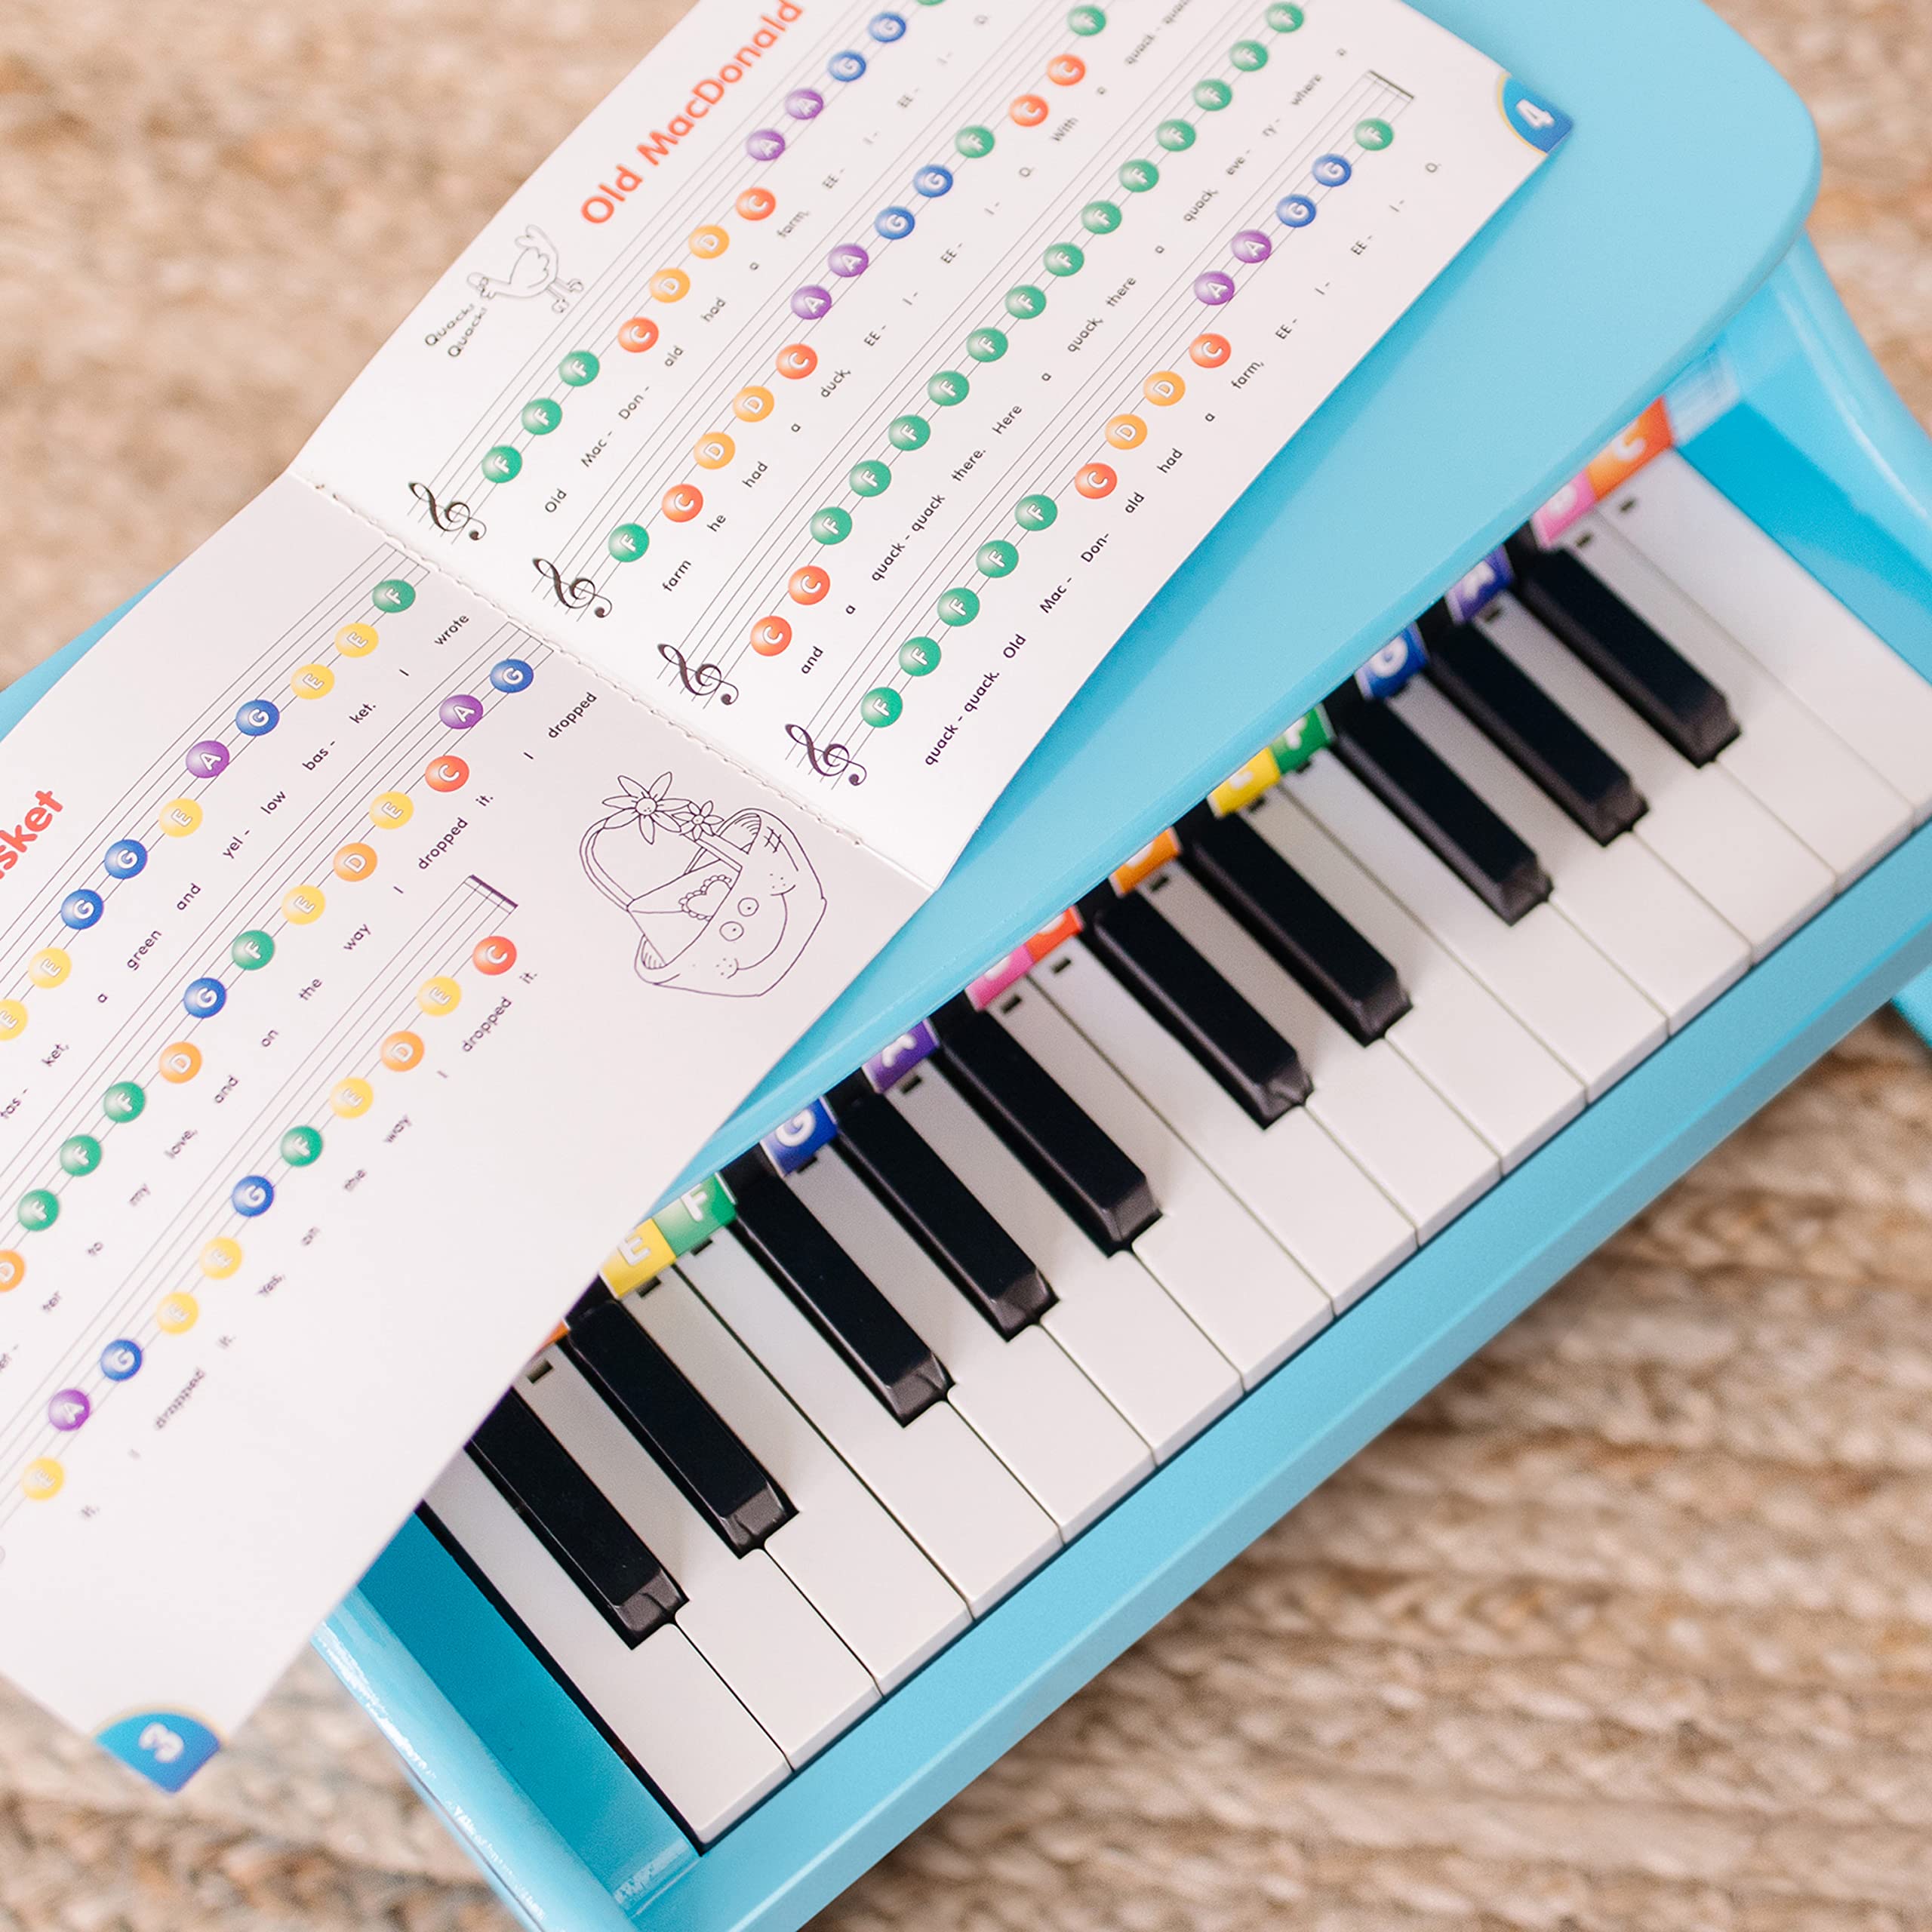 Melissa & Doug Learn-to-Play Piano With 25 Keys and Color-Coded Songbook - Blue - Toy Piano For Baby, Kids Piano Toy, Toddler Piano Toys For Ages 3+